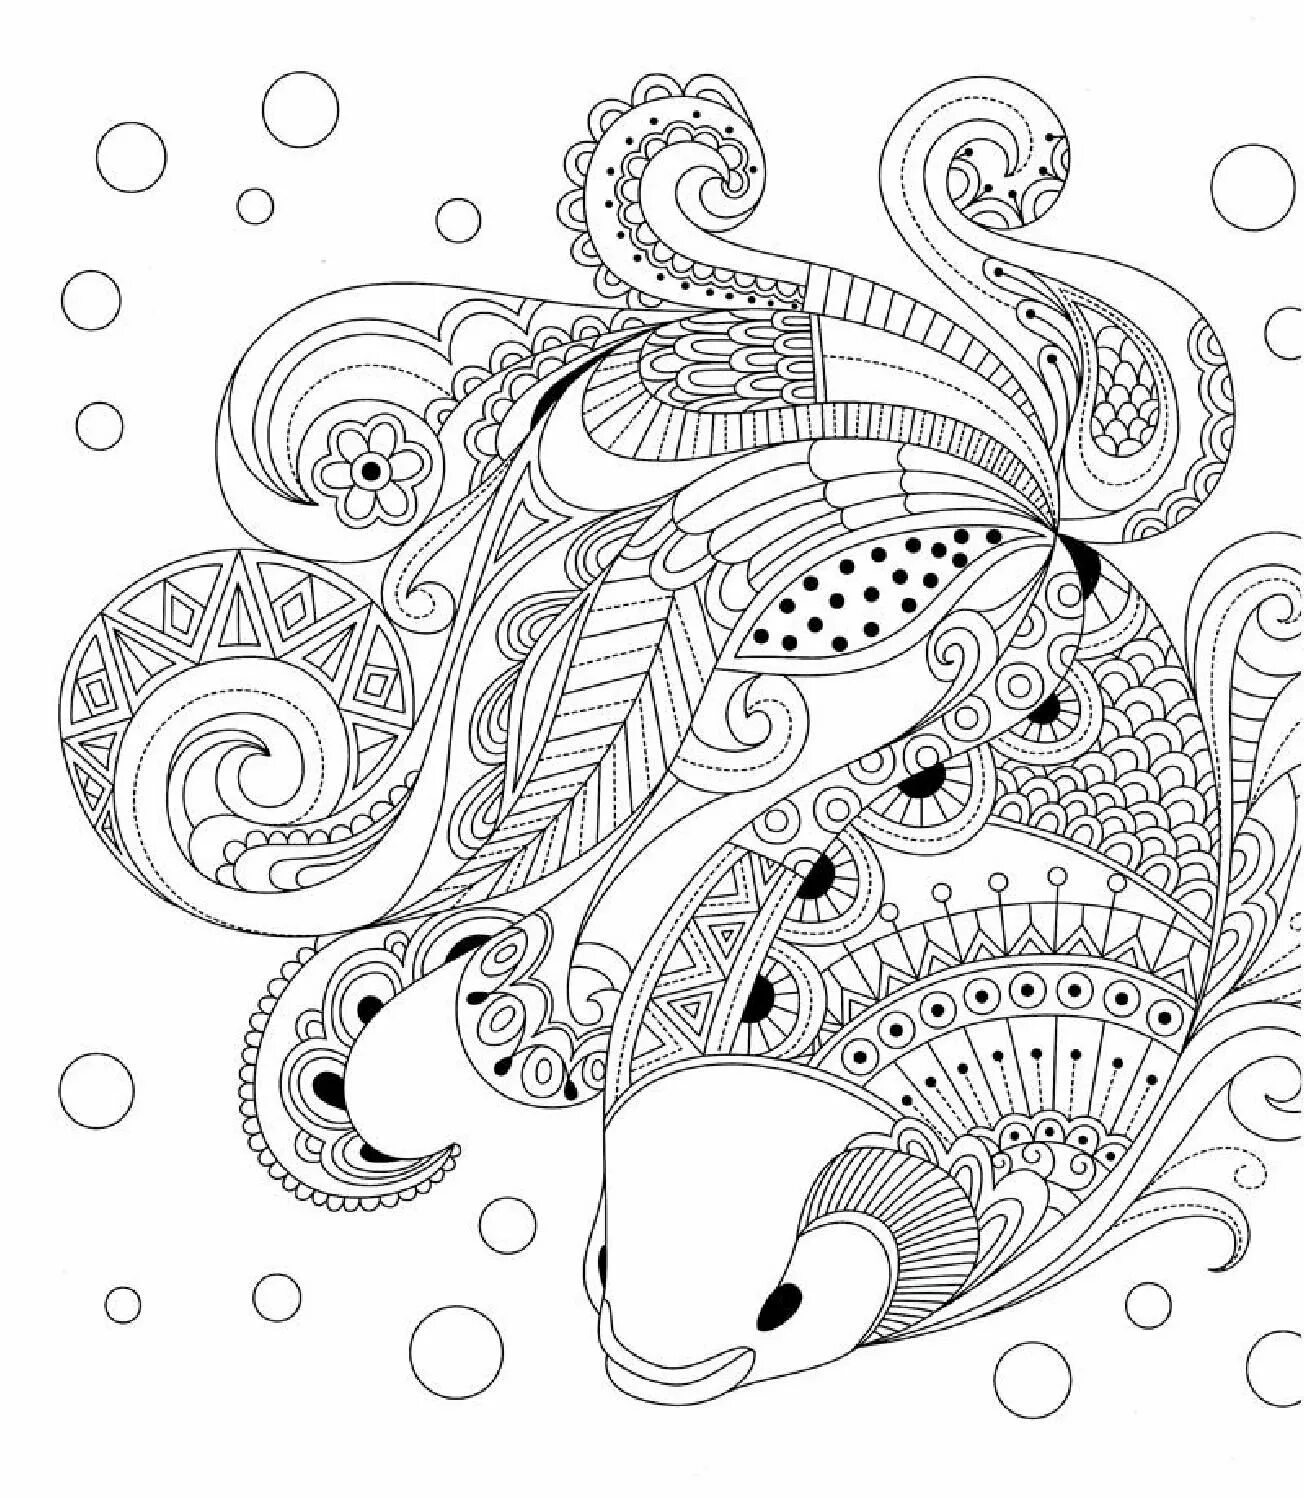 Funny coloring book relaxation antistress for adults